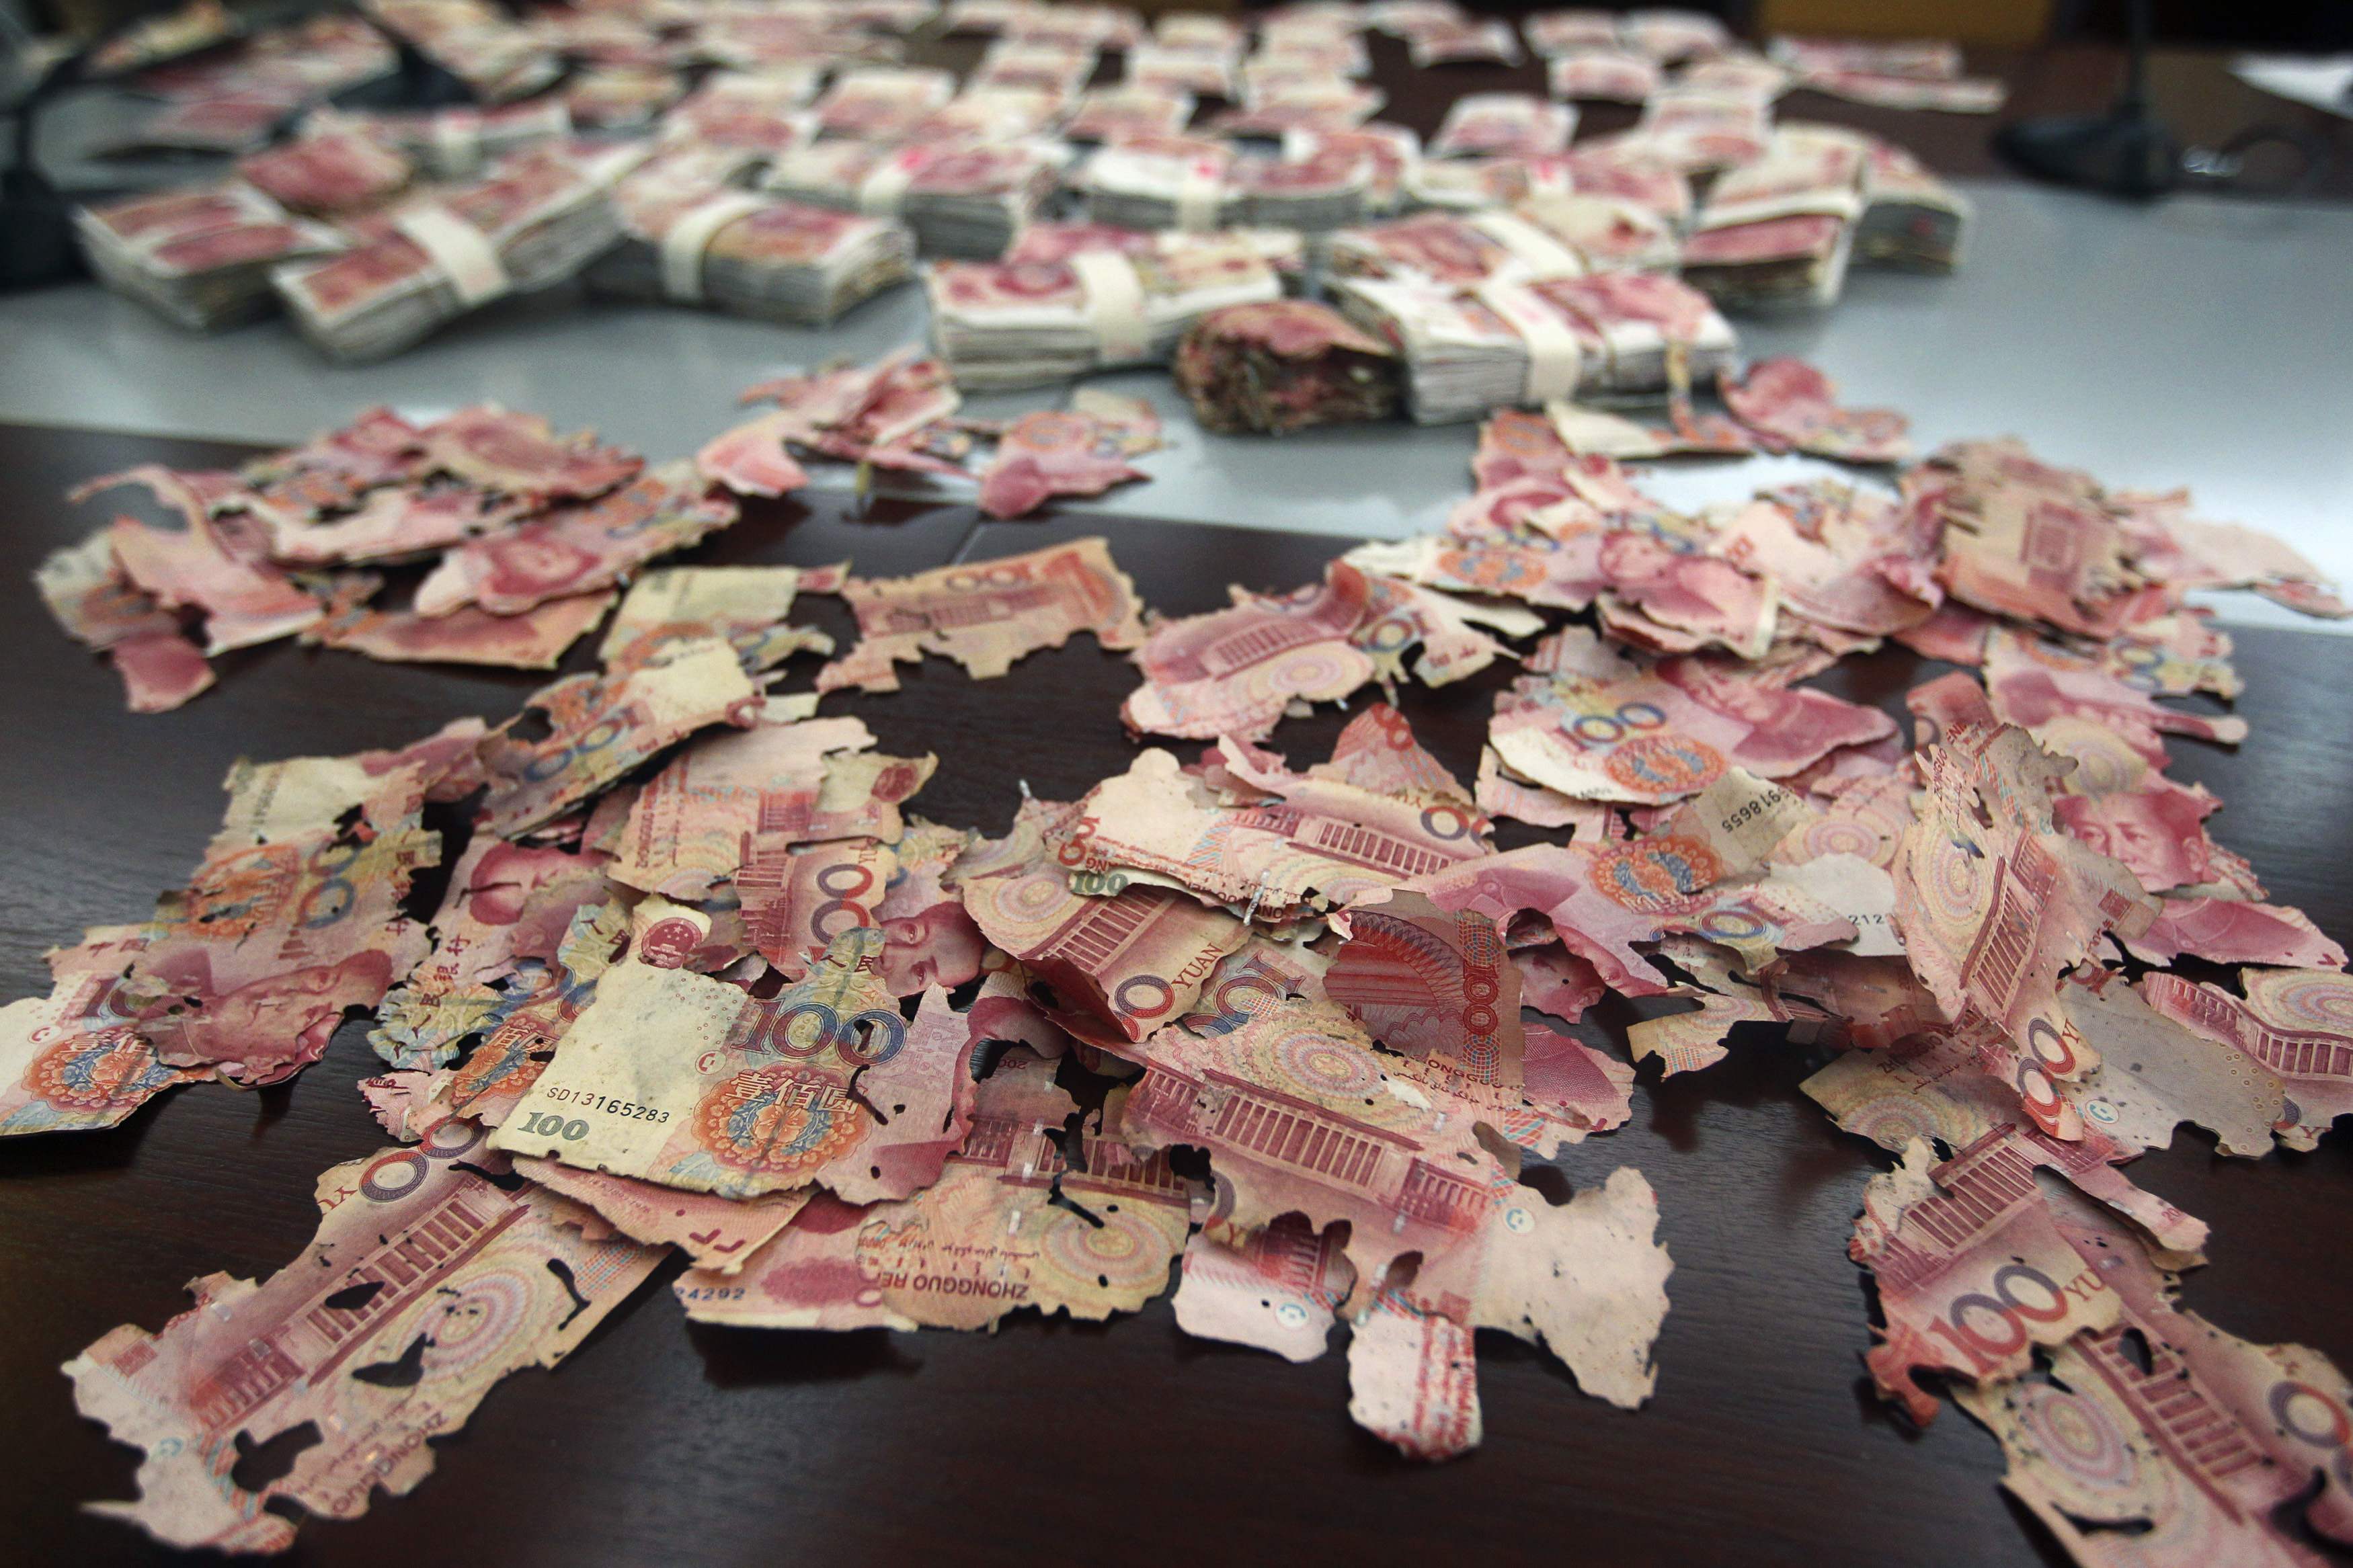 Damaged 100 yuan banknotes are seen on a table at a branch of China Bank in Foshan, Guangdong province, June 5, 2013. A woman brought about 400,000 yuan ($65,200), which she had kept at home, to the bank for replacement after most of the notes were bitten by white ants. Her notes were exchanged for new ones but for 60,000 yuan ($9,780) which the bank assessed and declared to be unchangeable. Picture taken June 5, 2013. REUTERS/Stringer (CHINA - Tags: BUSINESS SOCIETY TPX IMAGES OF THE DAY) CHINA OUT. NO COMMERCIAL OR EDITORIAL SALES IN CHINA